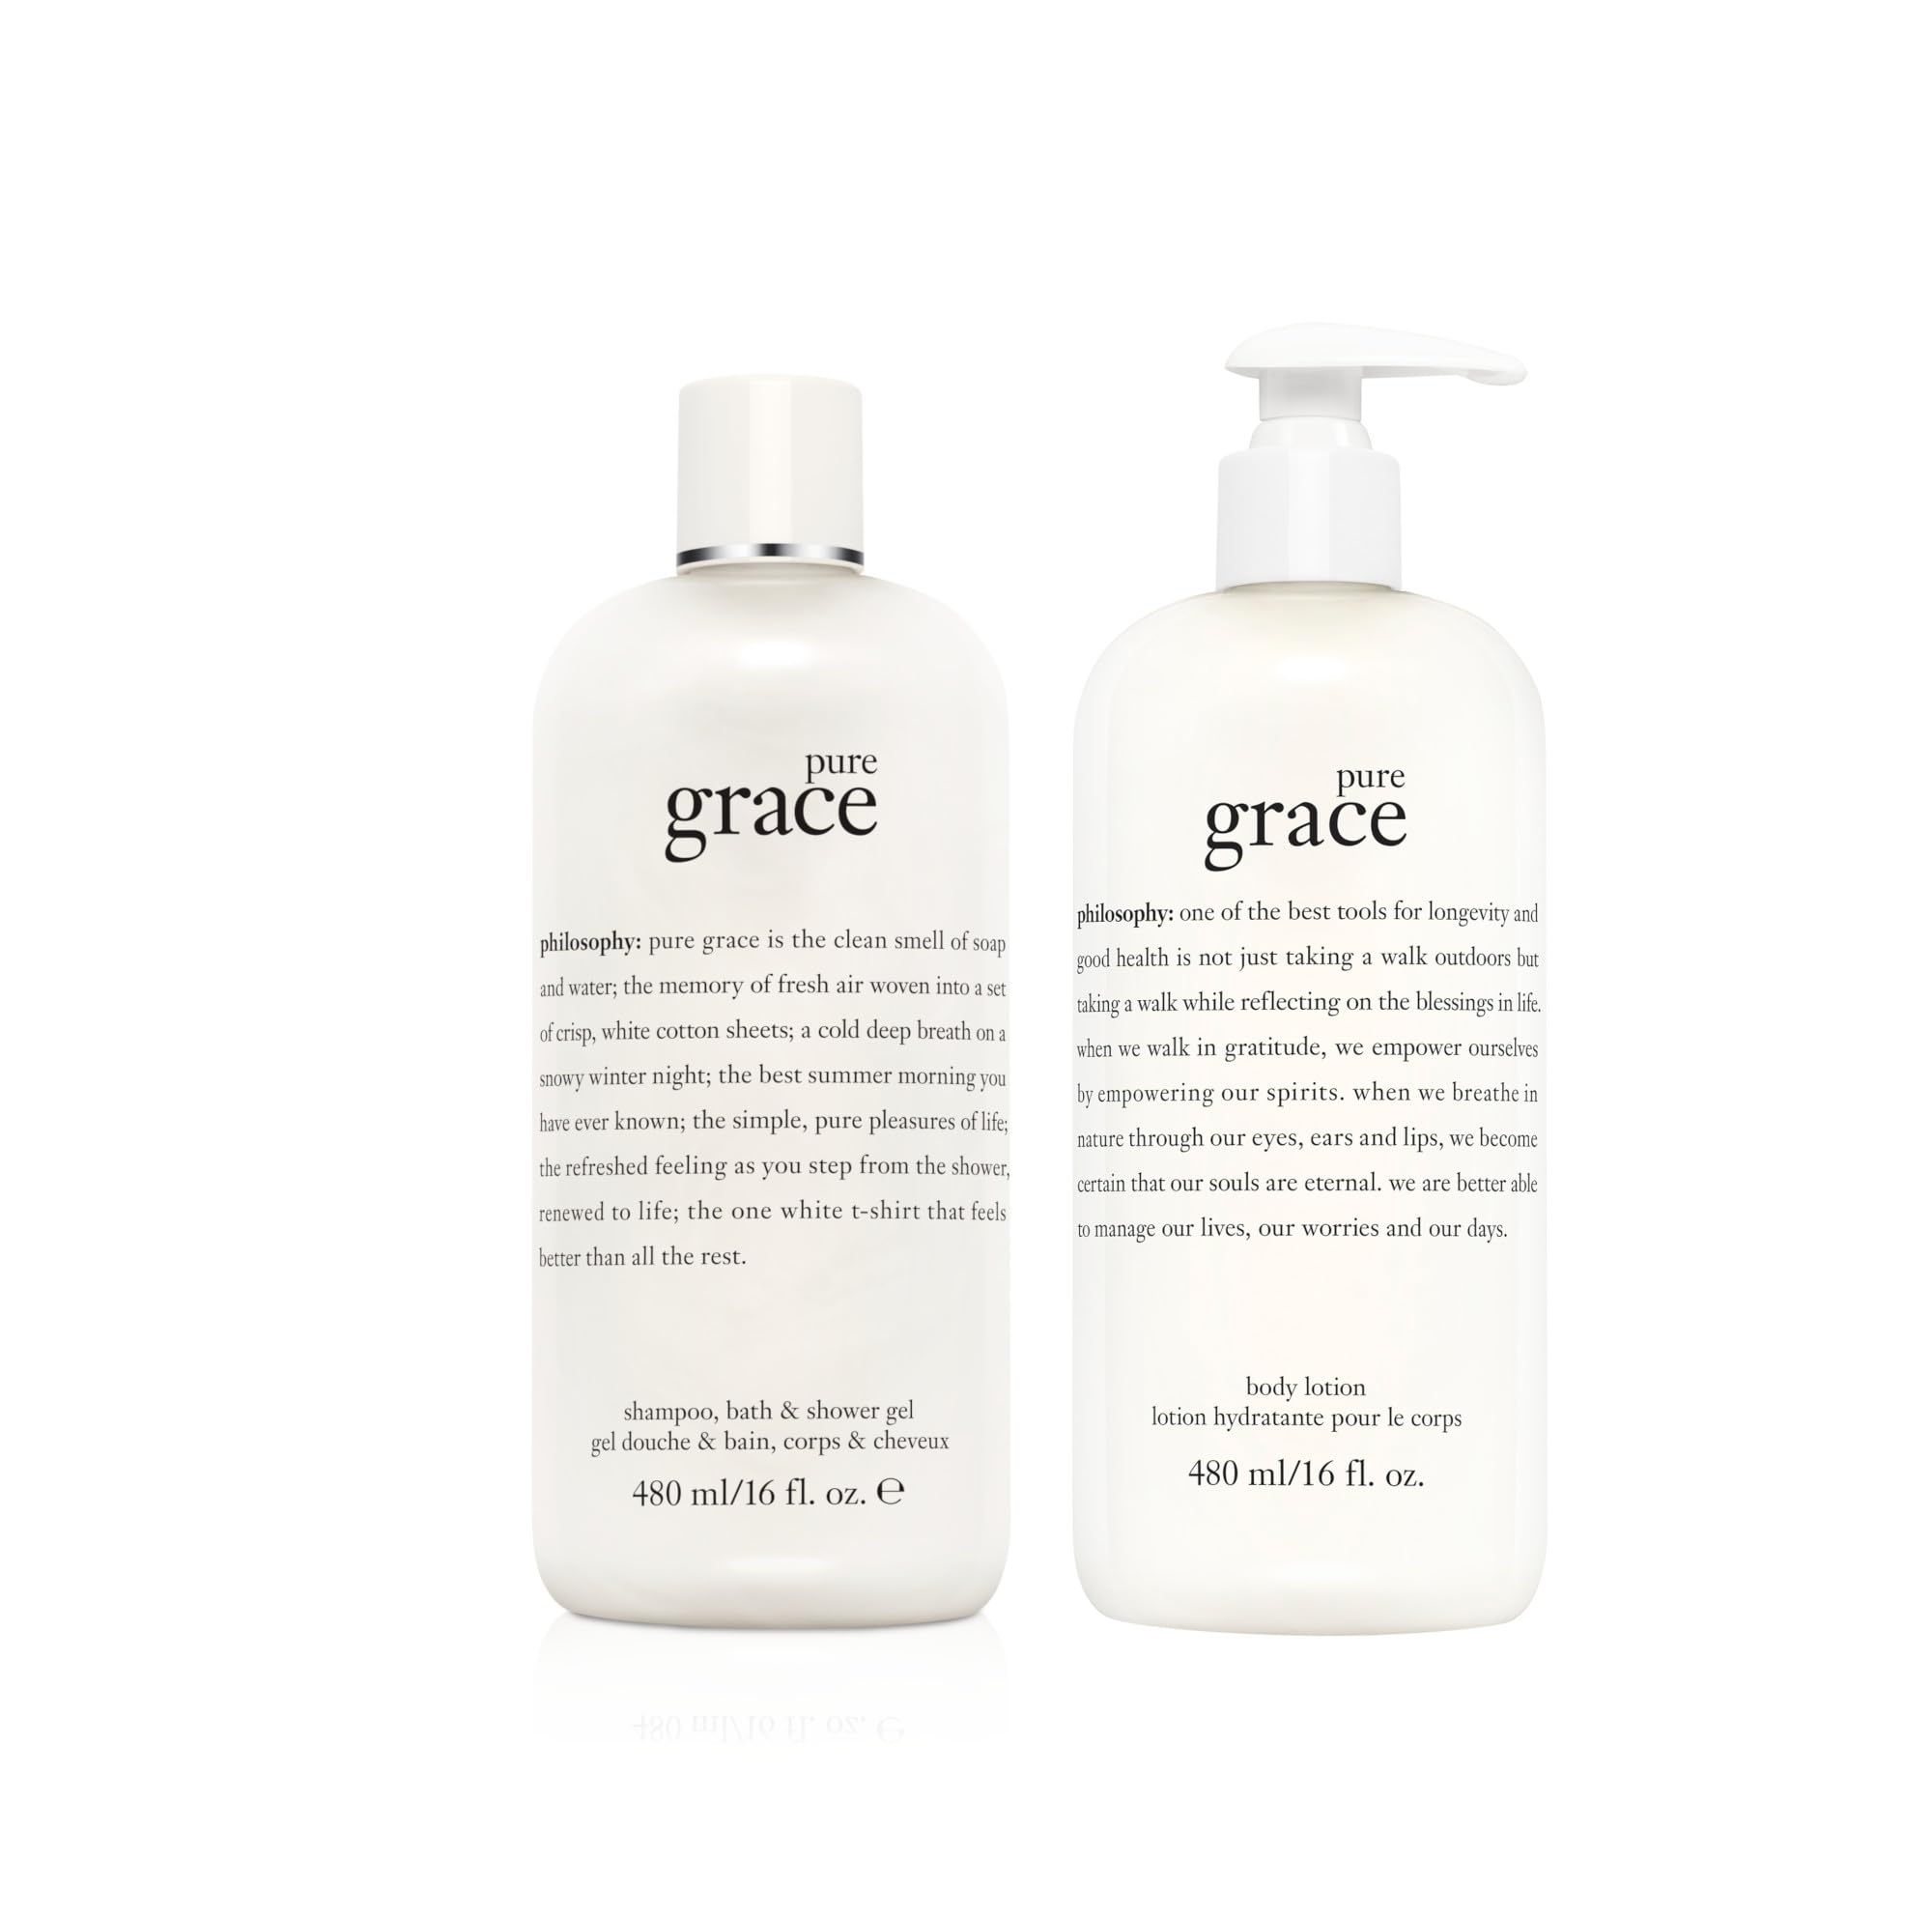 philosophy pure grace shower gel + body lotion bundle - Notes of water lily, leafy greens & musk